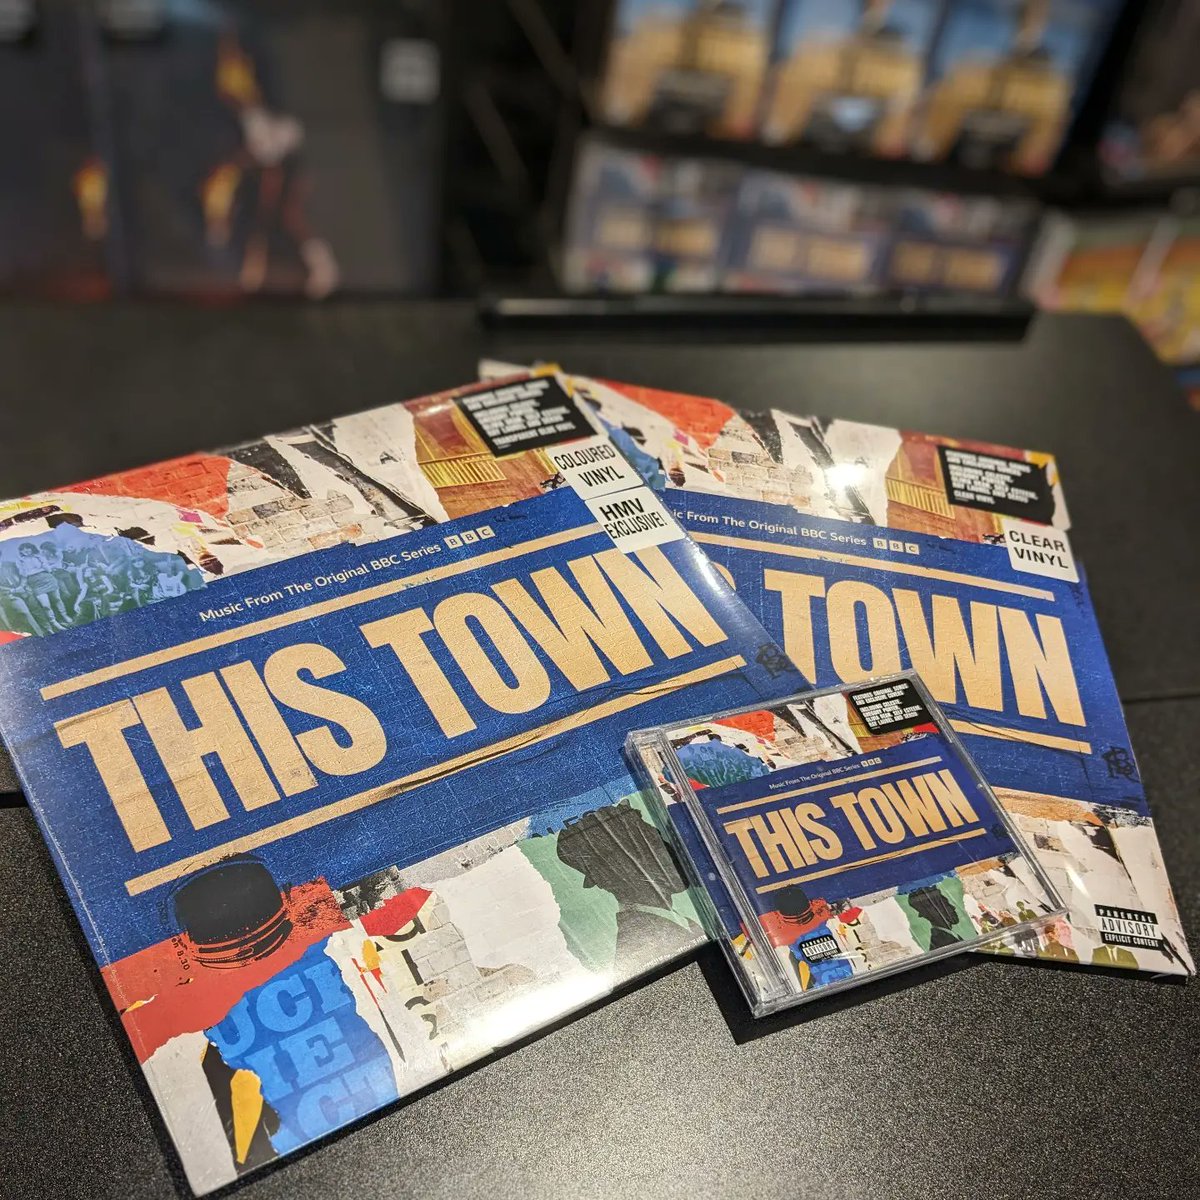 The fabulous series This Town, set in #coventry and #birmingham is yours to own today on DVD and Blu-ray 🕴🏼🕴🏼We also have the excellent soundtrack on CD, clear vinyl and #hmvexclusive blue vinyl #thistown #StevenKnight #fuckthefactory #benrose #levibrown #jordanbolger #eveaustin